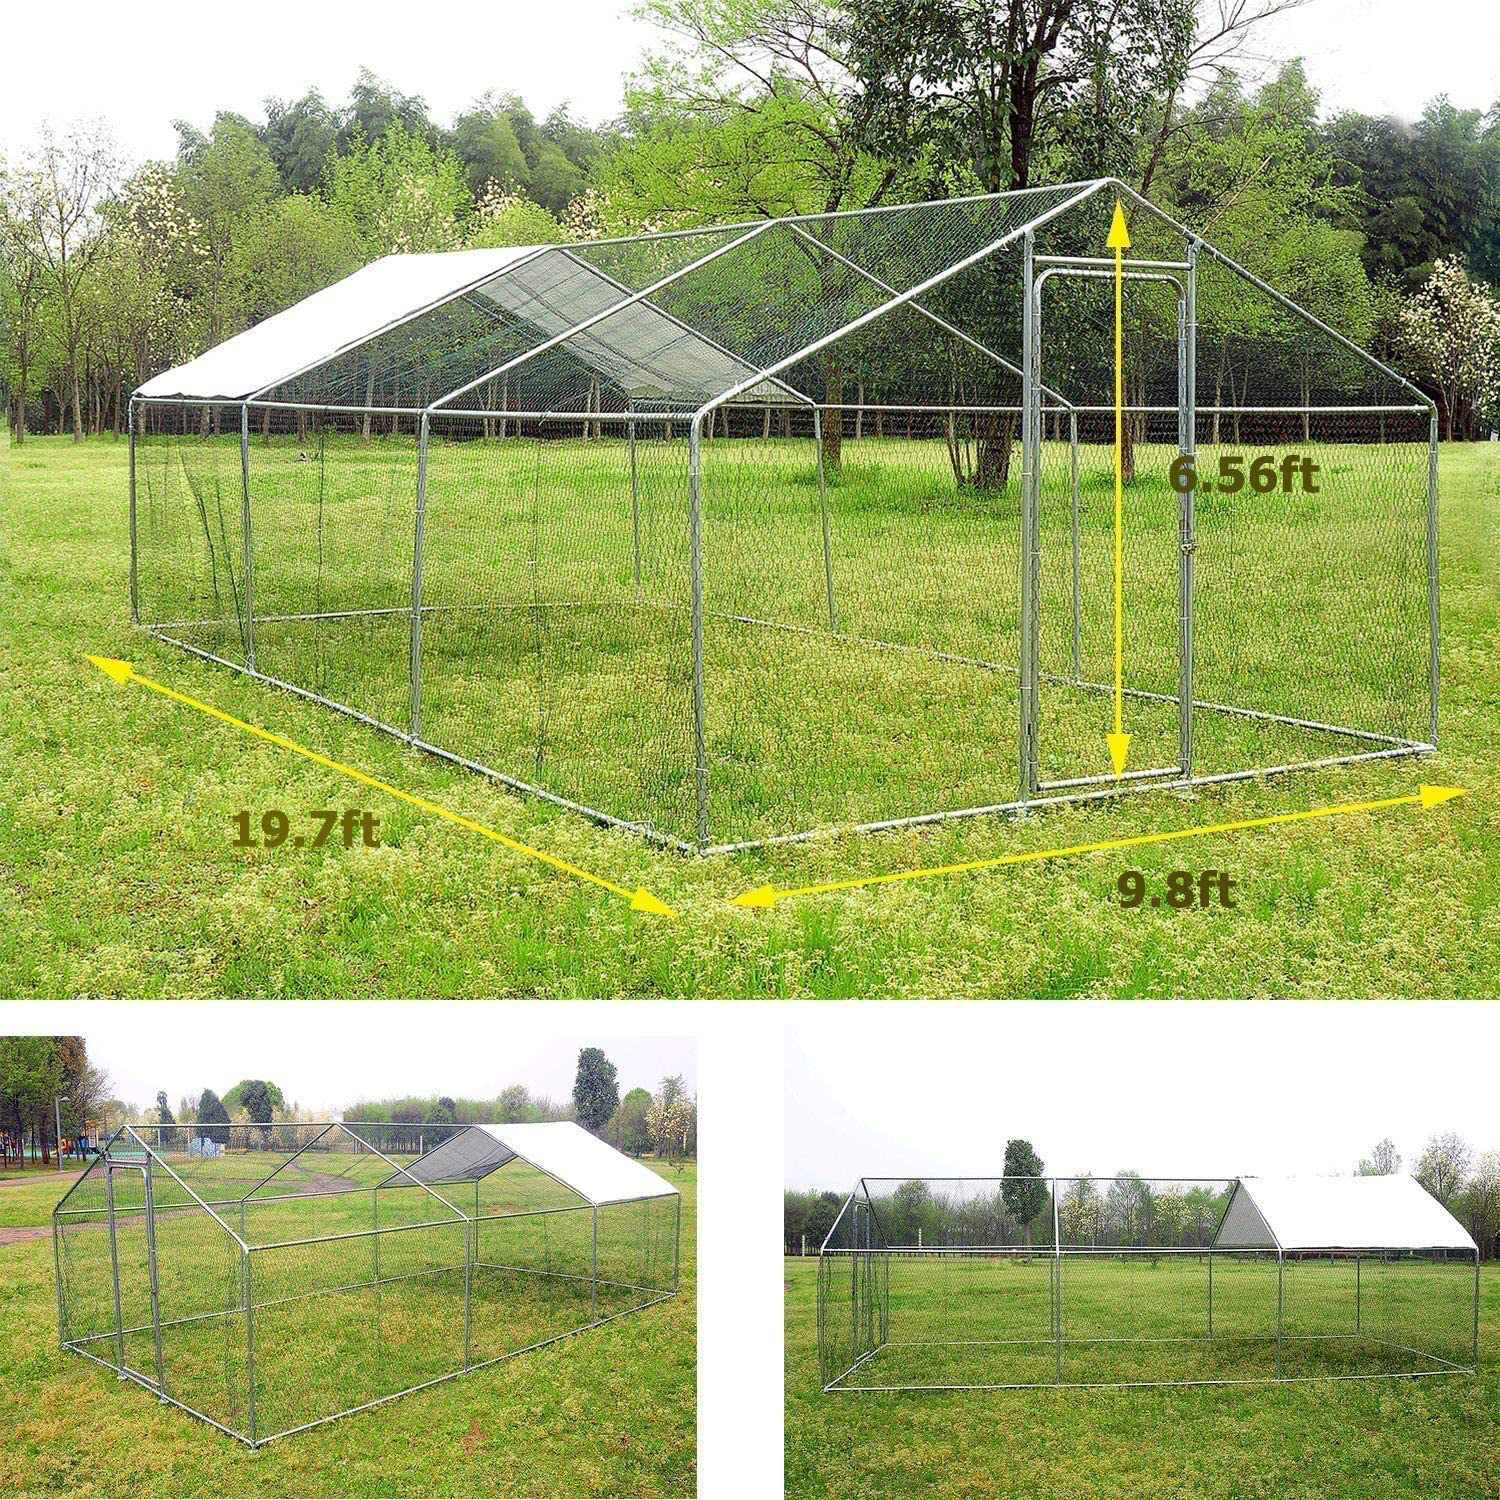 Large Chicken Coop Walk-In Metal Poultry Cage House Rabbits Habitat Cage Spire Shaped Coop with Waterproof and Anti-Ultraviolet Cover for Outdoor Backyard Farm Use (9.8' L X 19.7' W X 6.56' H)